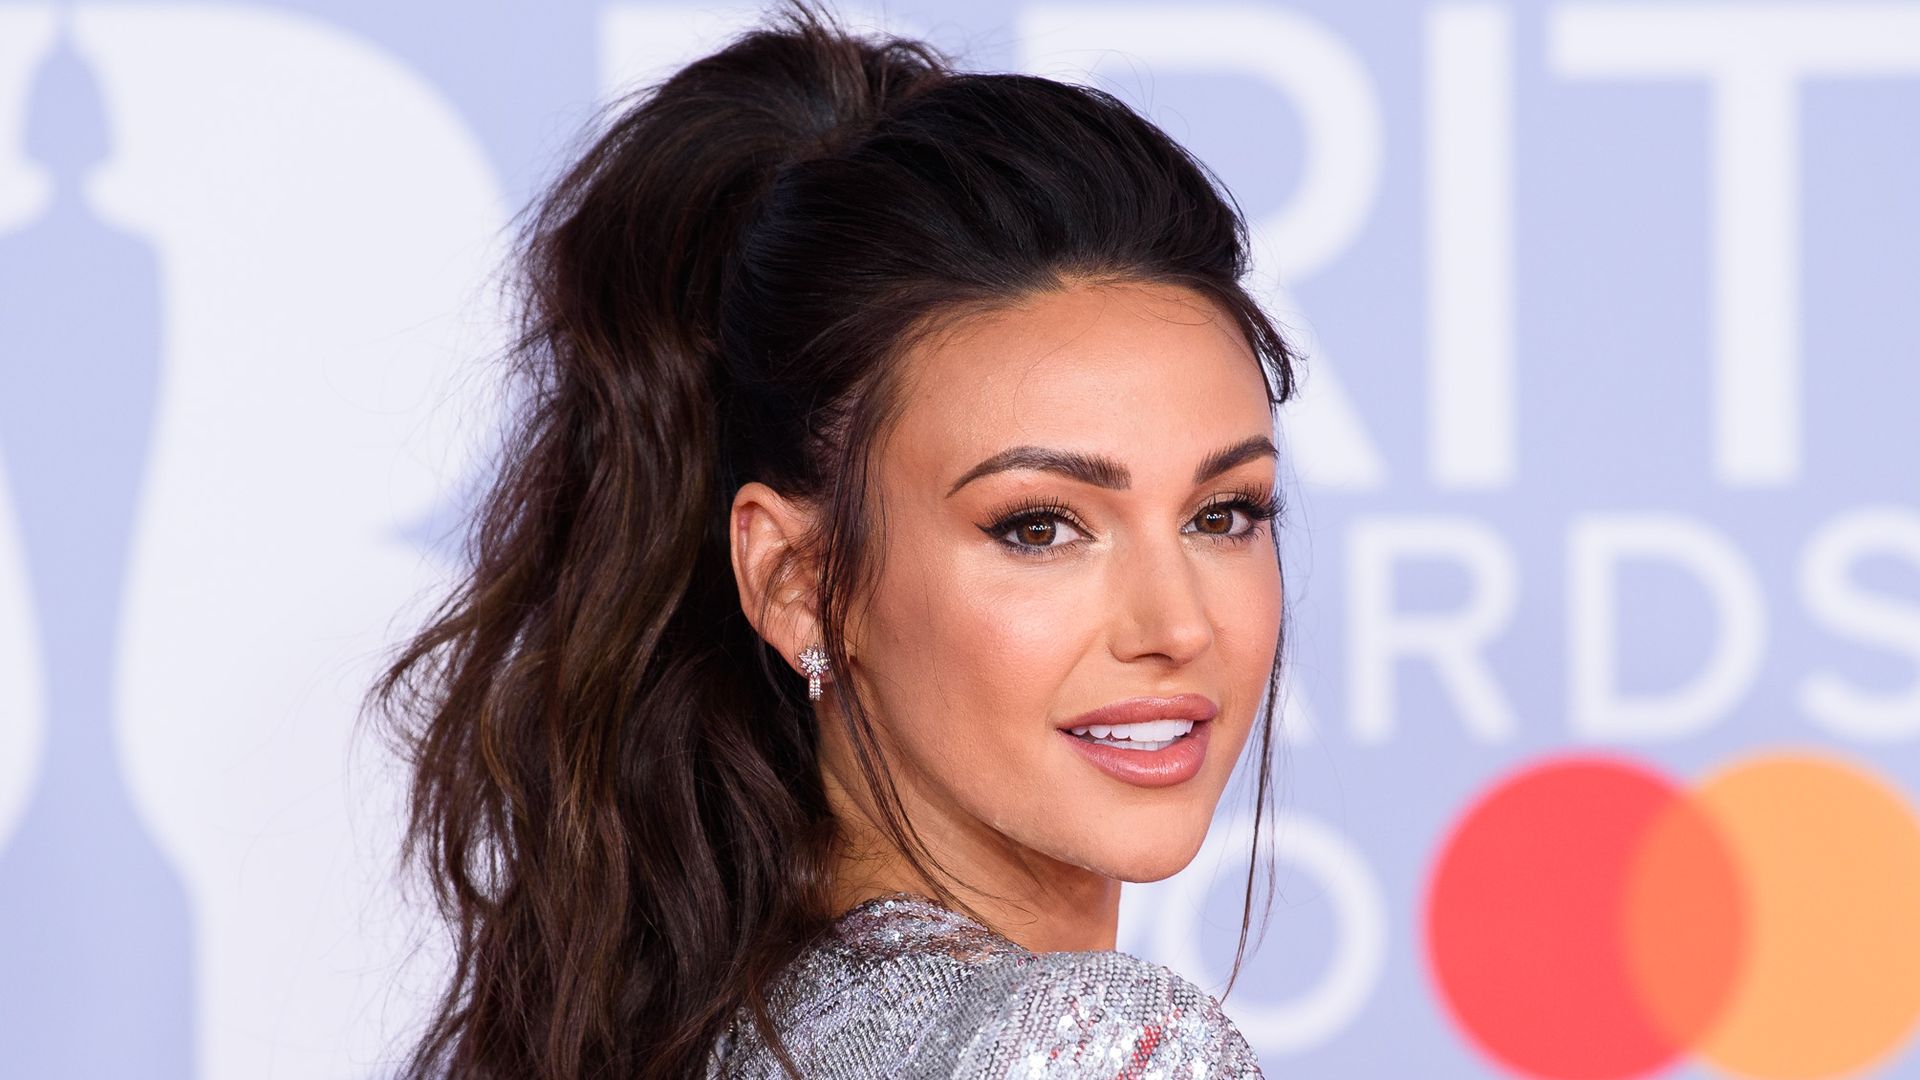 Michelle Keegan attends The BRIT Awards 2020 at The O2 Arena on February 18, 2020 in London, England